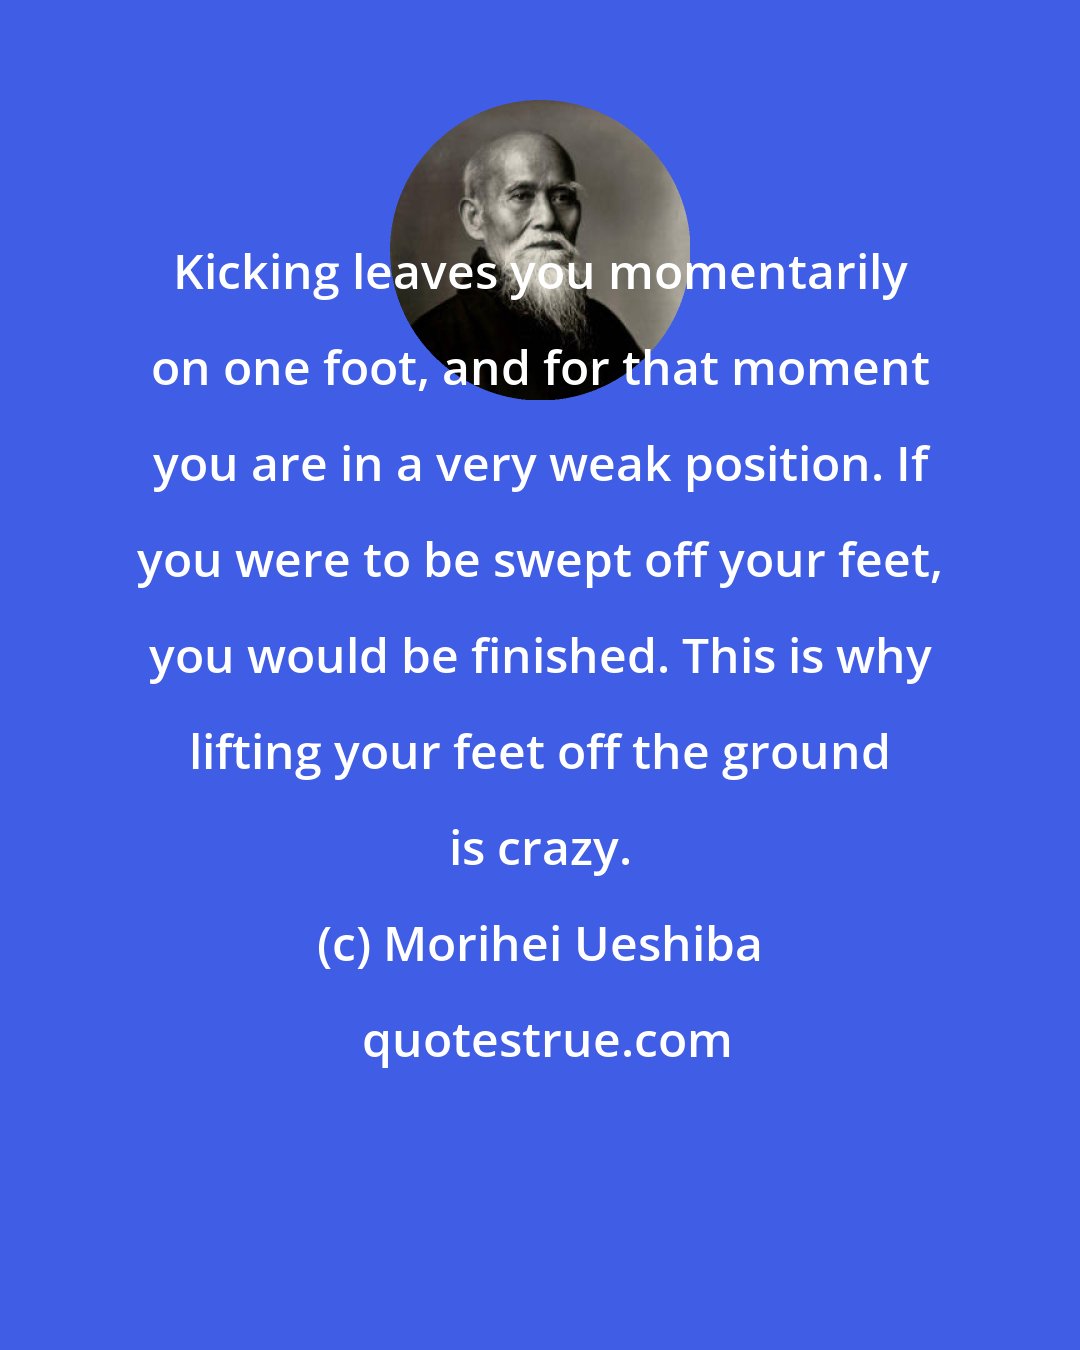 Morihei Ueshiba: Kicking leaves you momentarily on one foot, and for that moment you are in a very weak position. If you were to be swept off your feet, you would be finished. This is why lifting your feet off the ground is crazy.